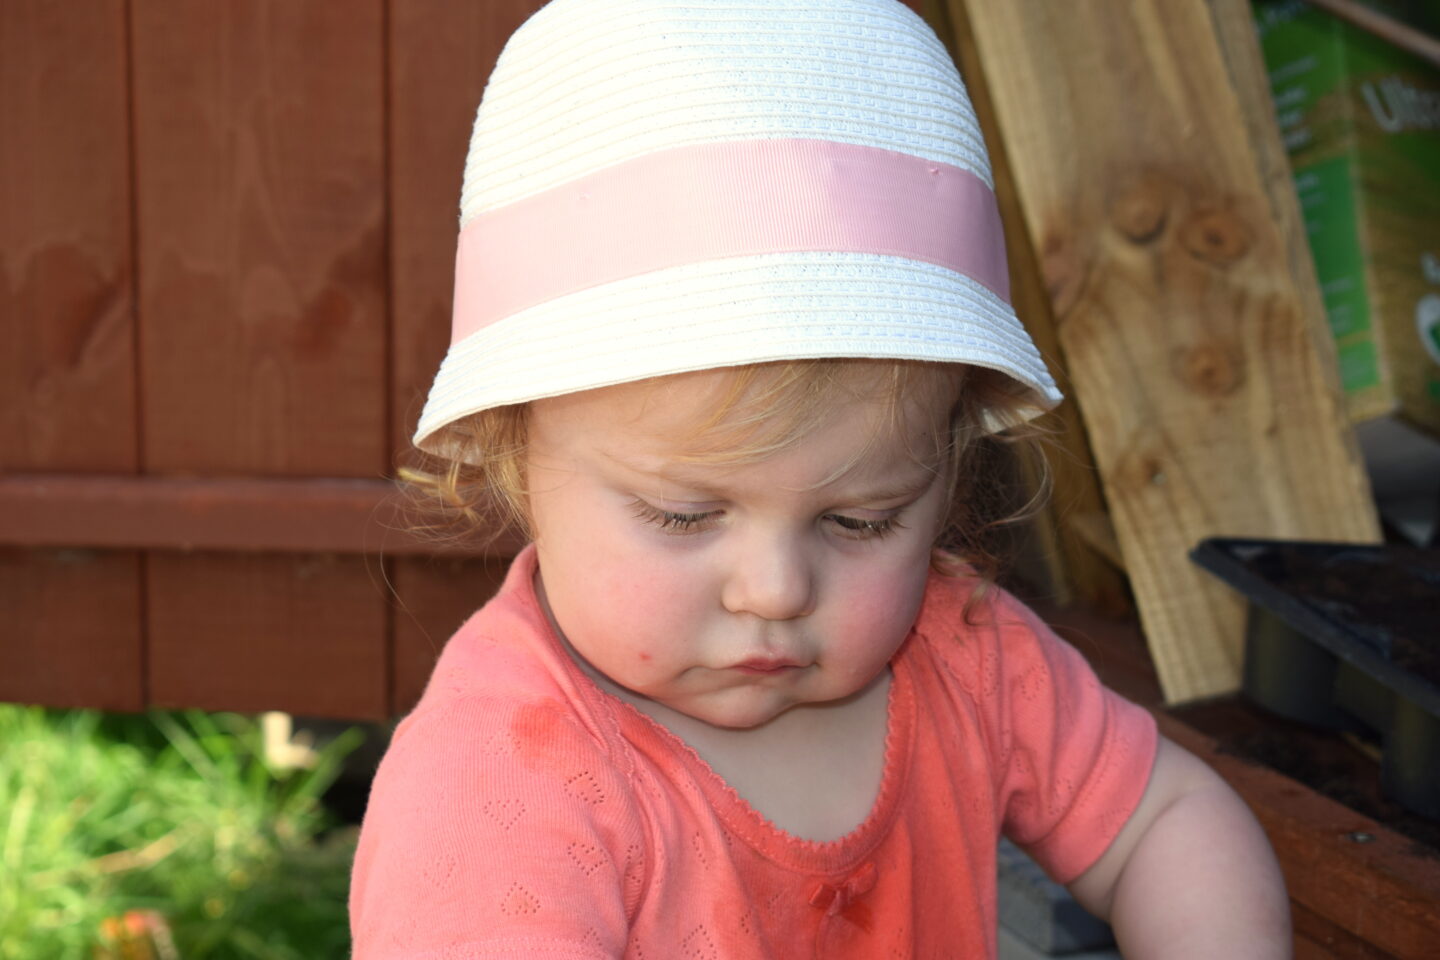 14 months old girl in sunhat, looking down